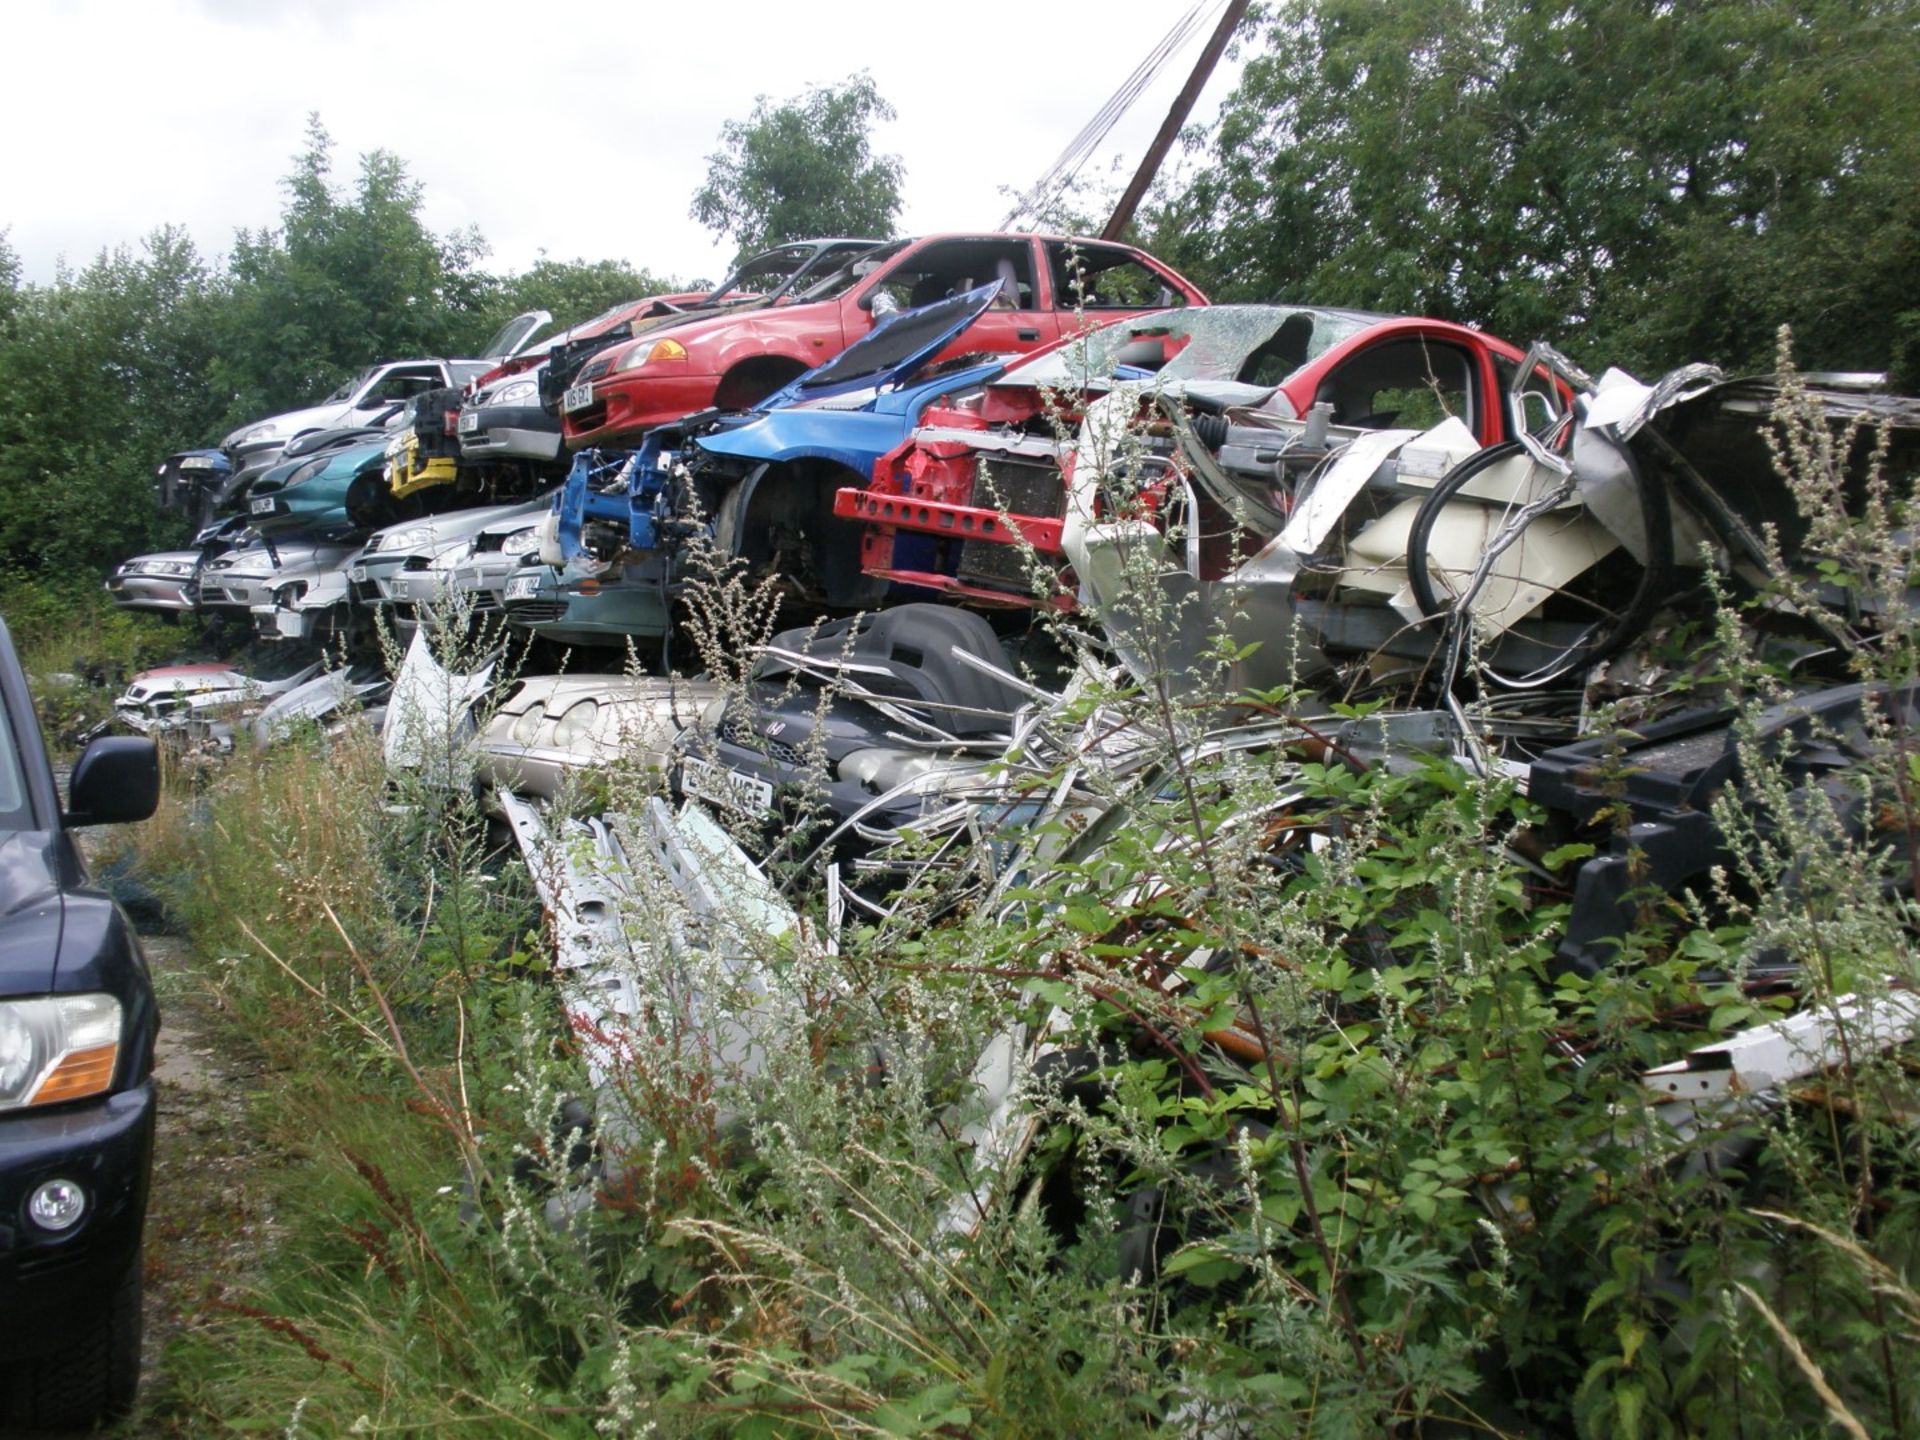 The Residual Scrap Vehicles on site together with other scrap hidden in the undergrowth. To include - Image 2 of 10